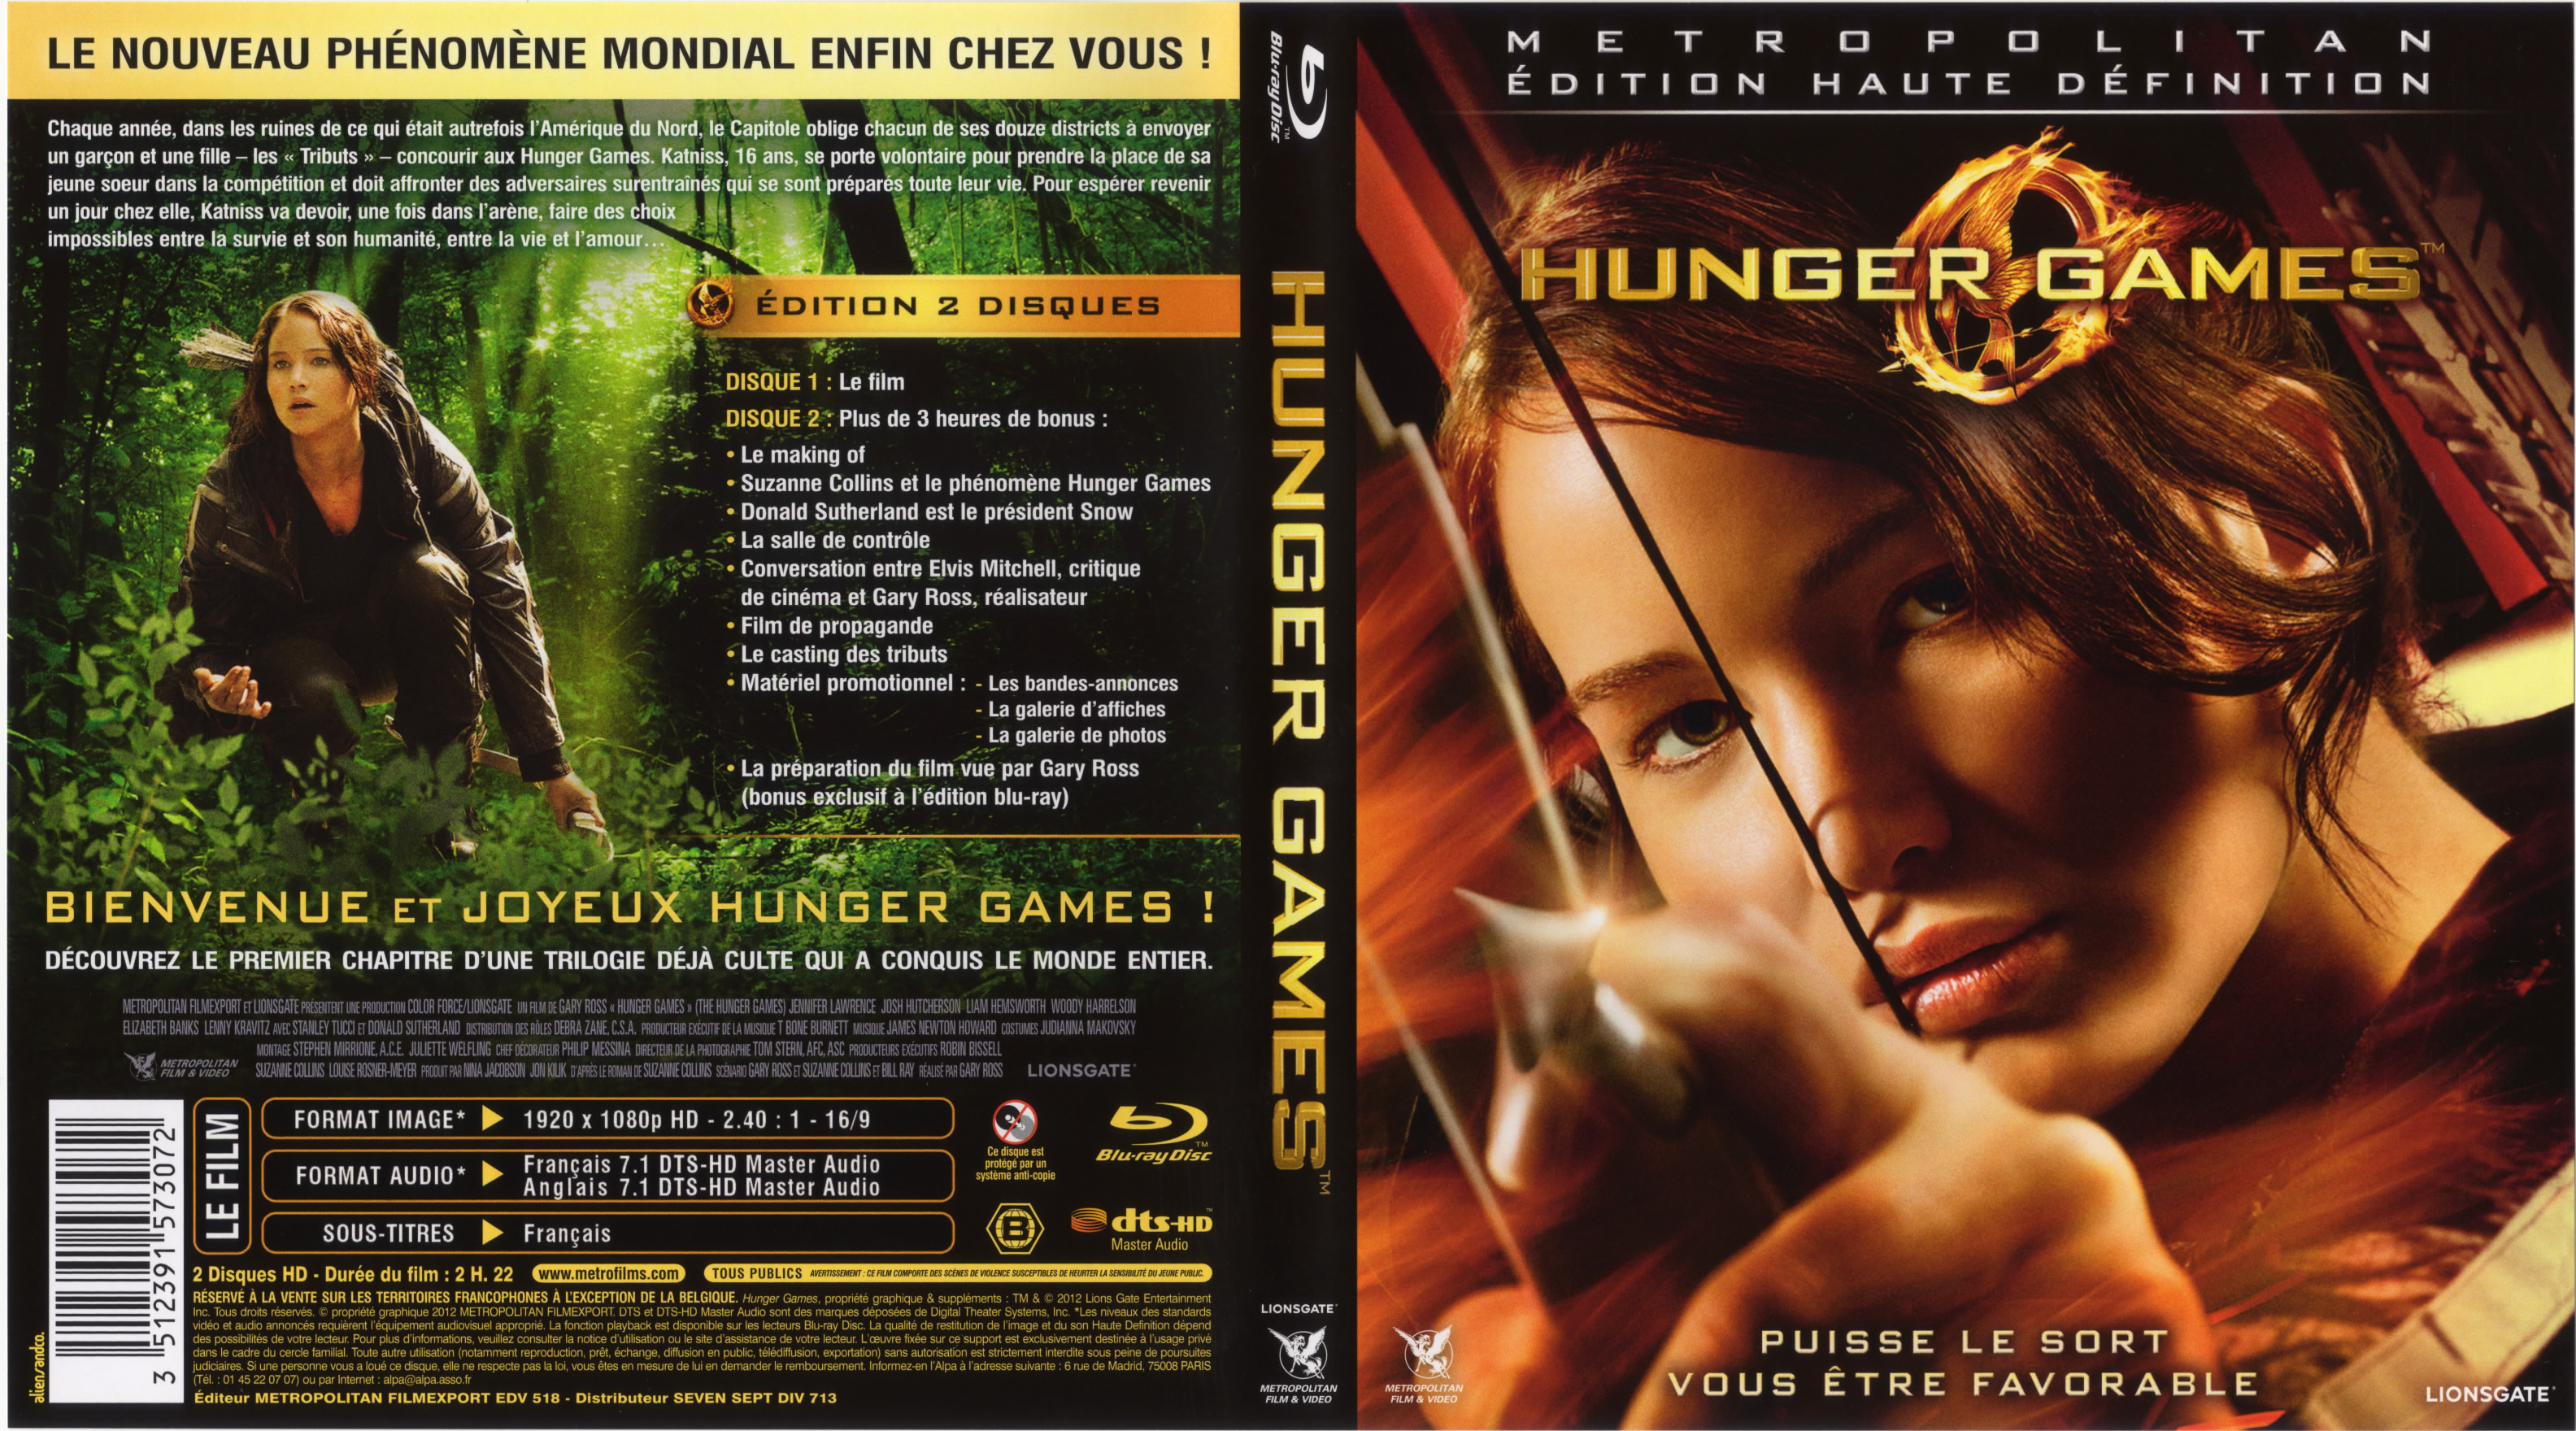 Jaquette DVD Hunger Games (BLU-RAY)